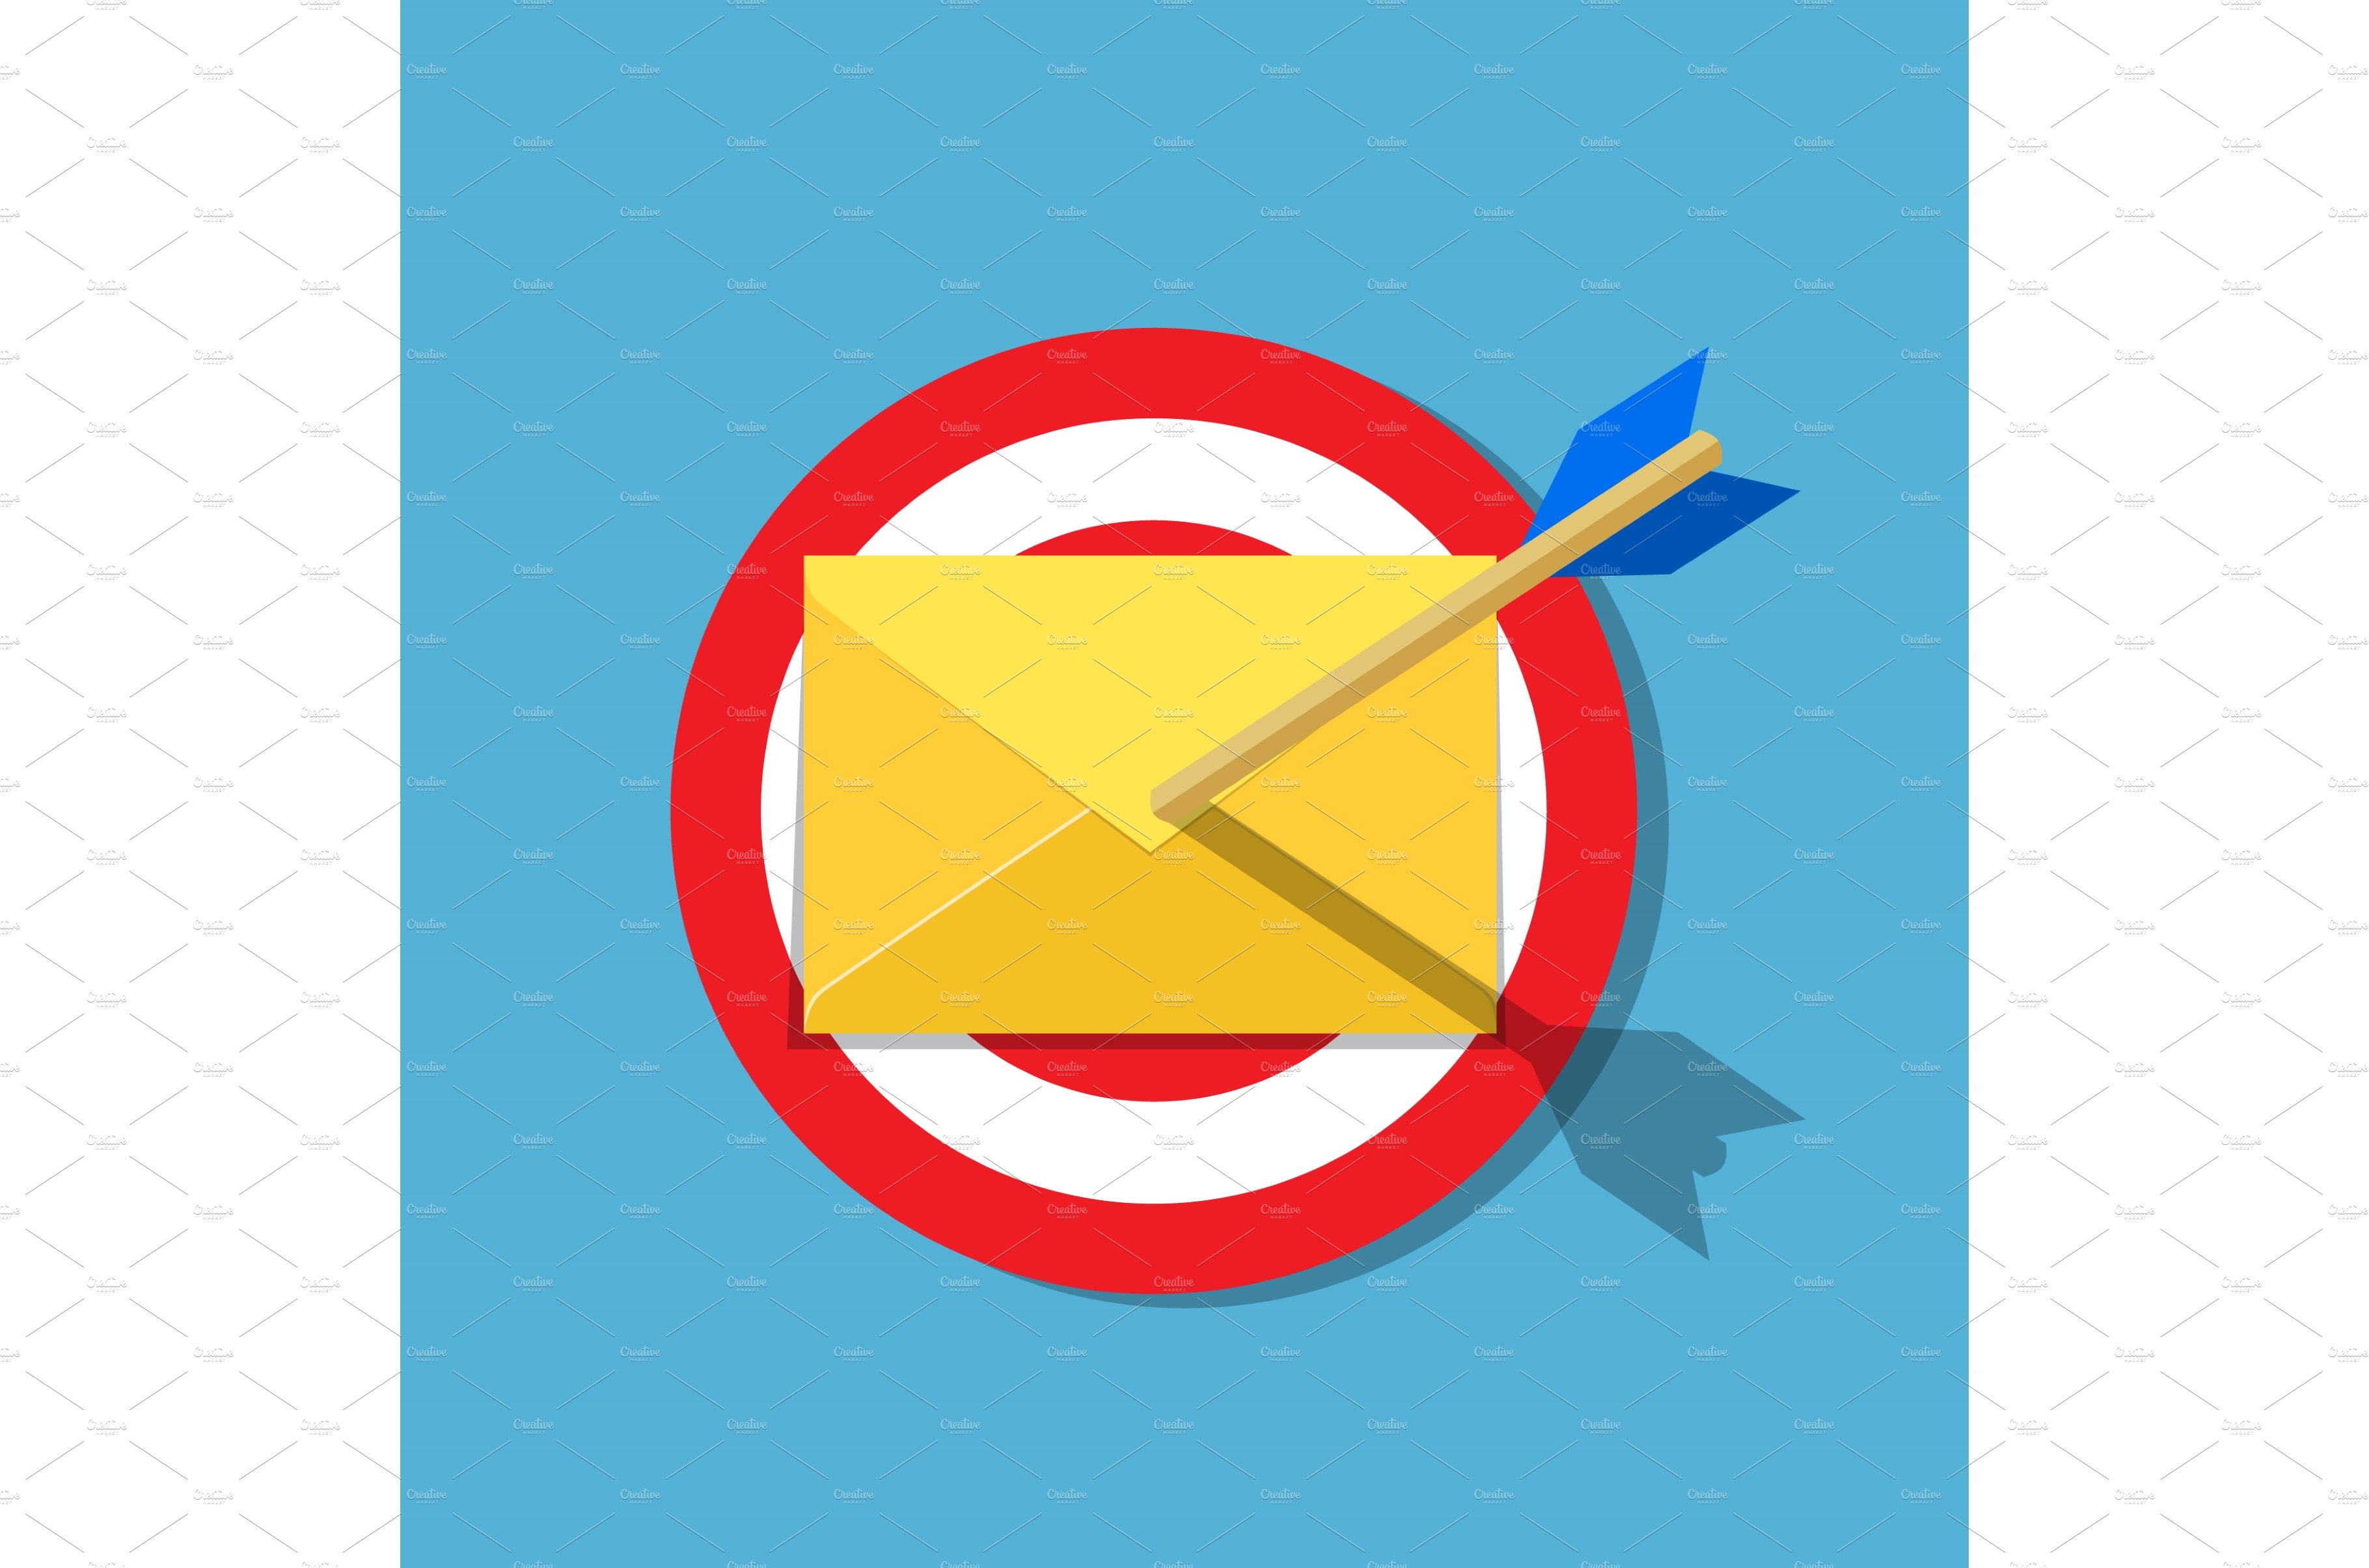 Email letter with arrow on the cover image.